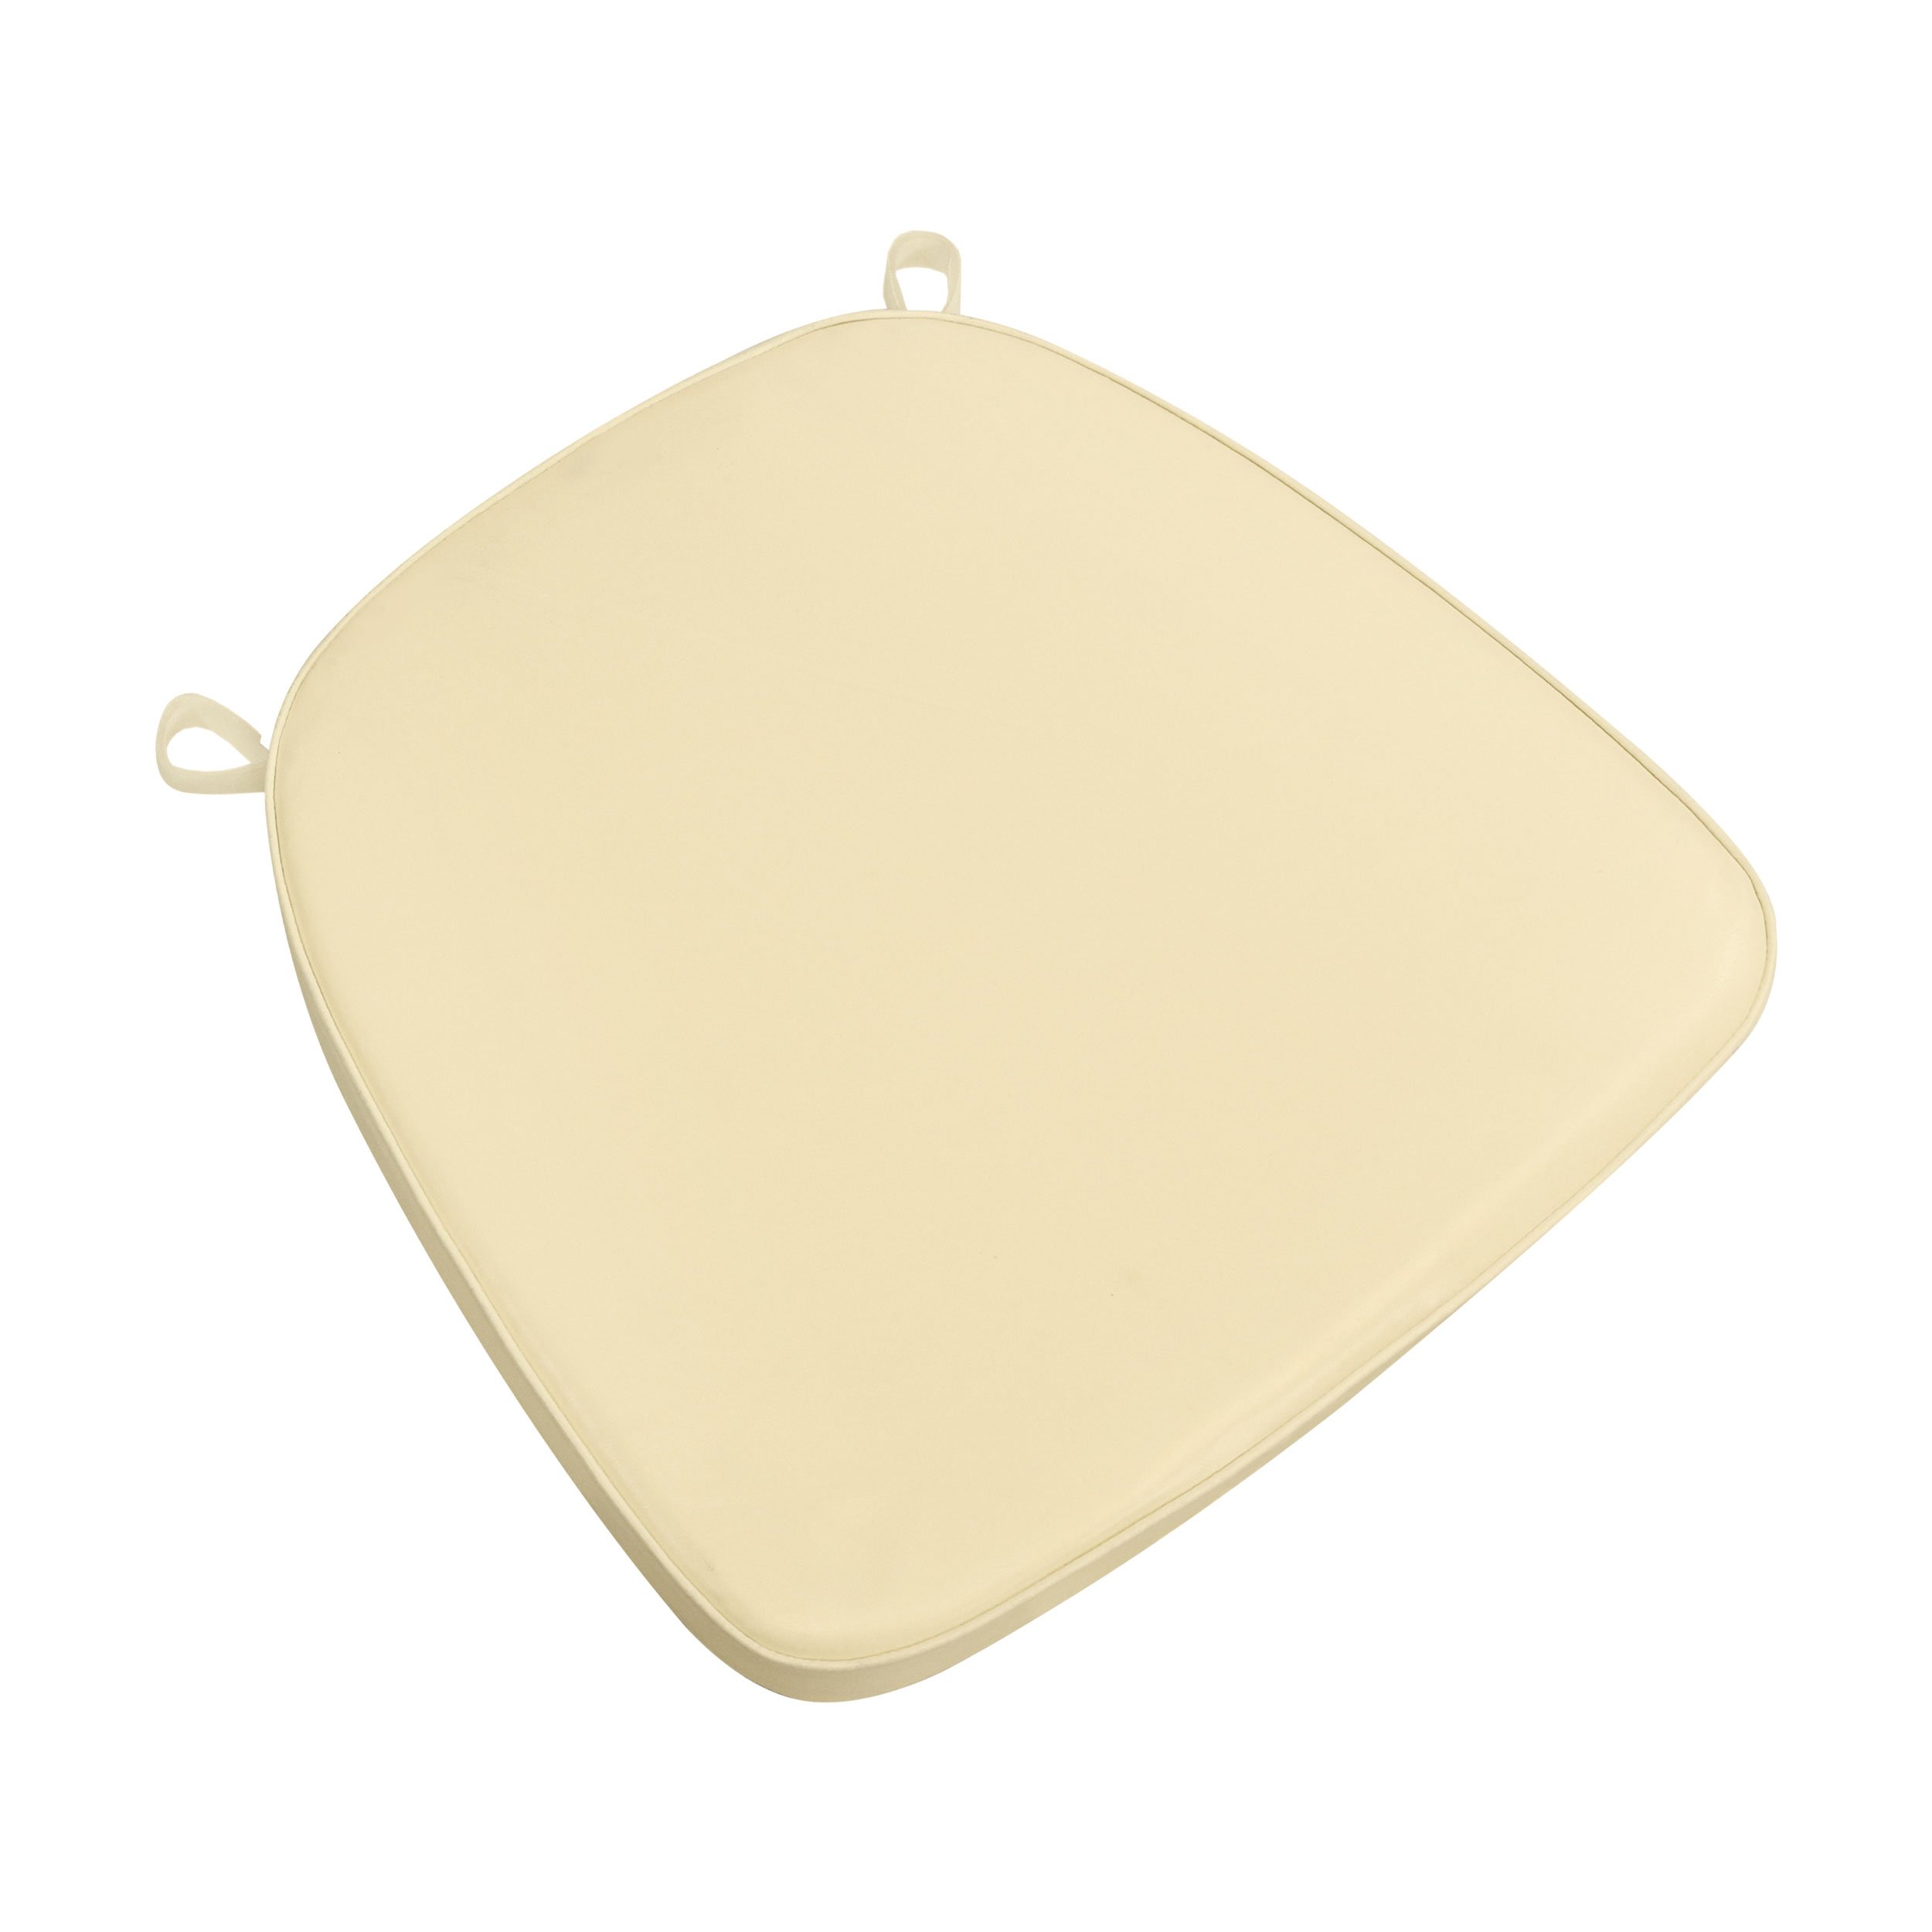 Cushion Vinyl Material Velcro Strap Ivory Color Front View